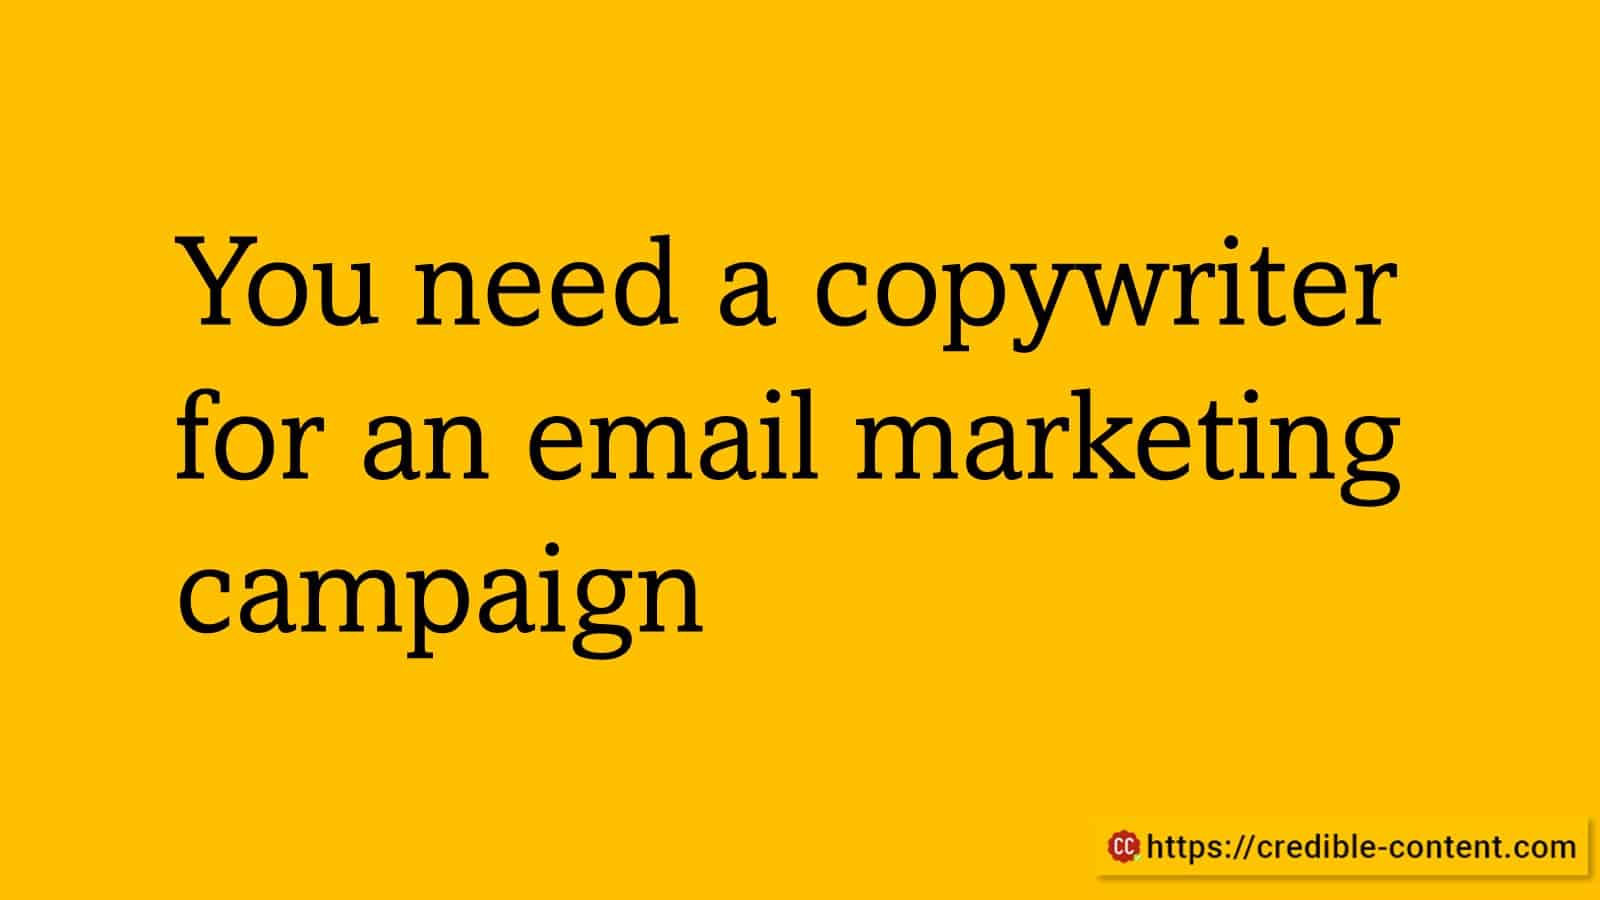 You need a copywriter for an email marketing campaign